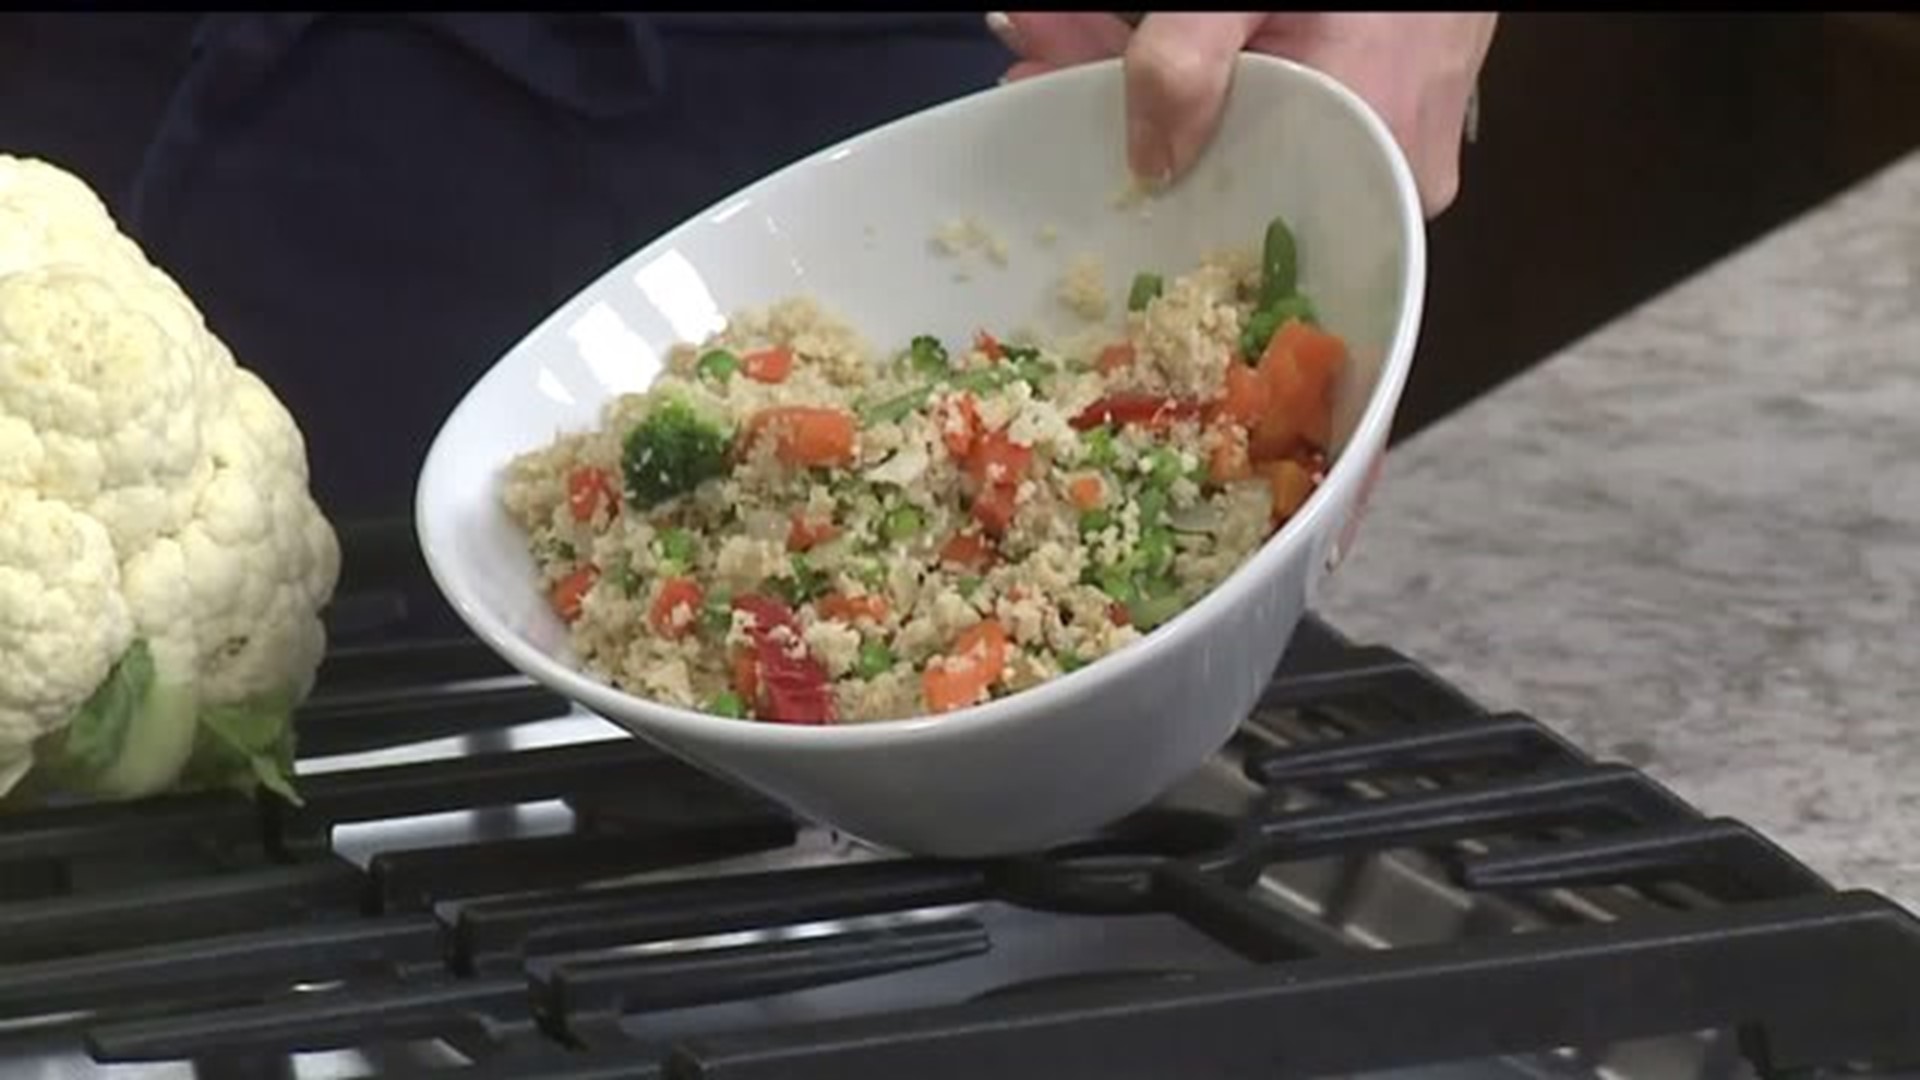 Fareway: Fried rice and vegetables